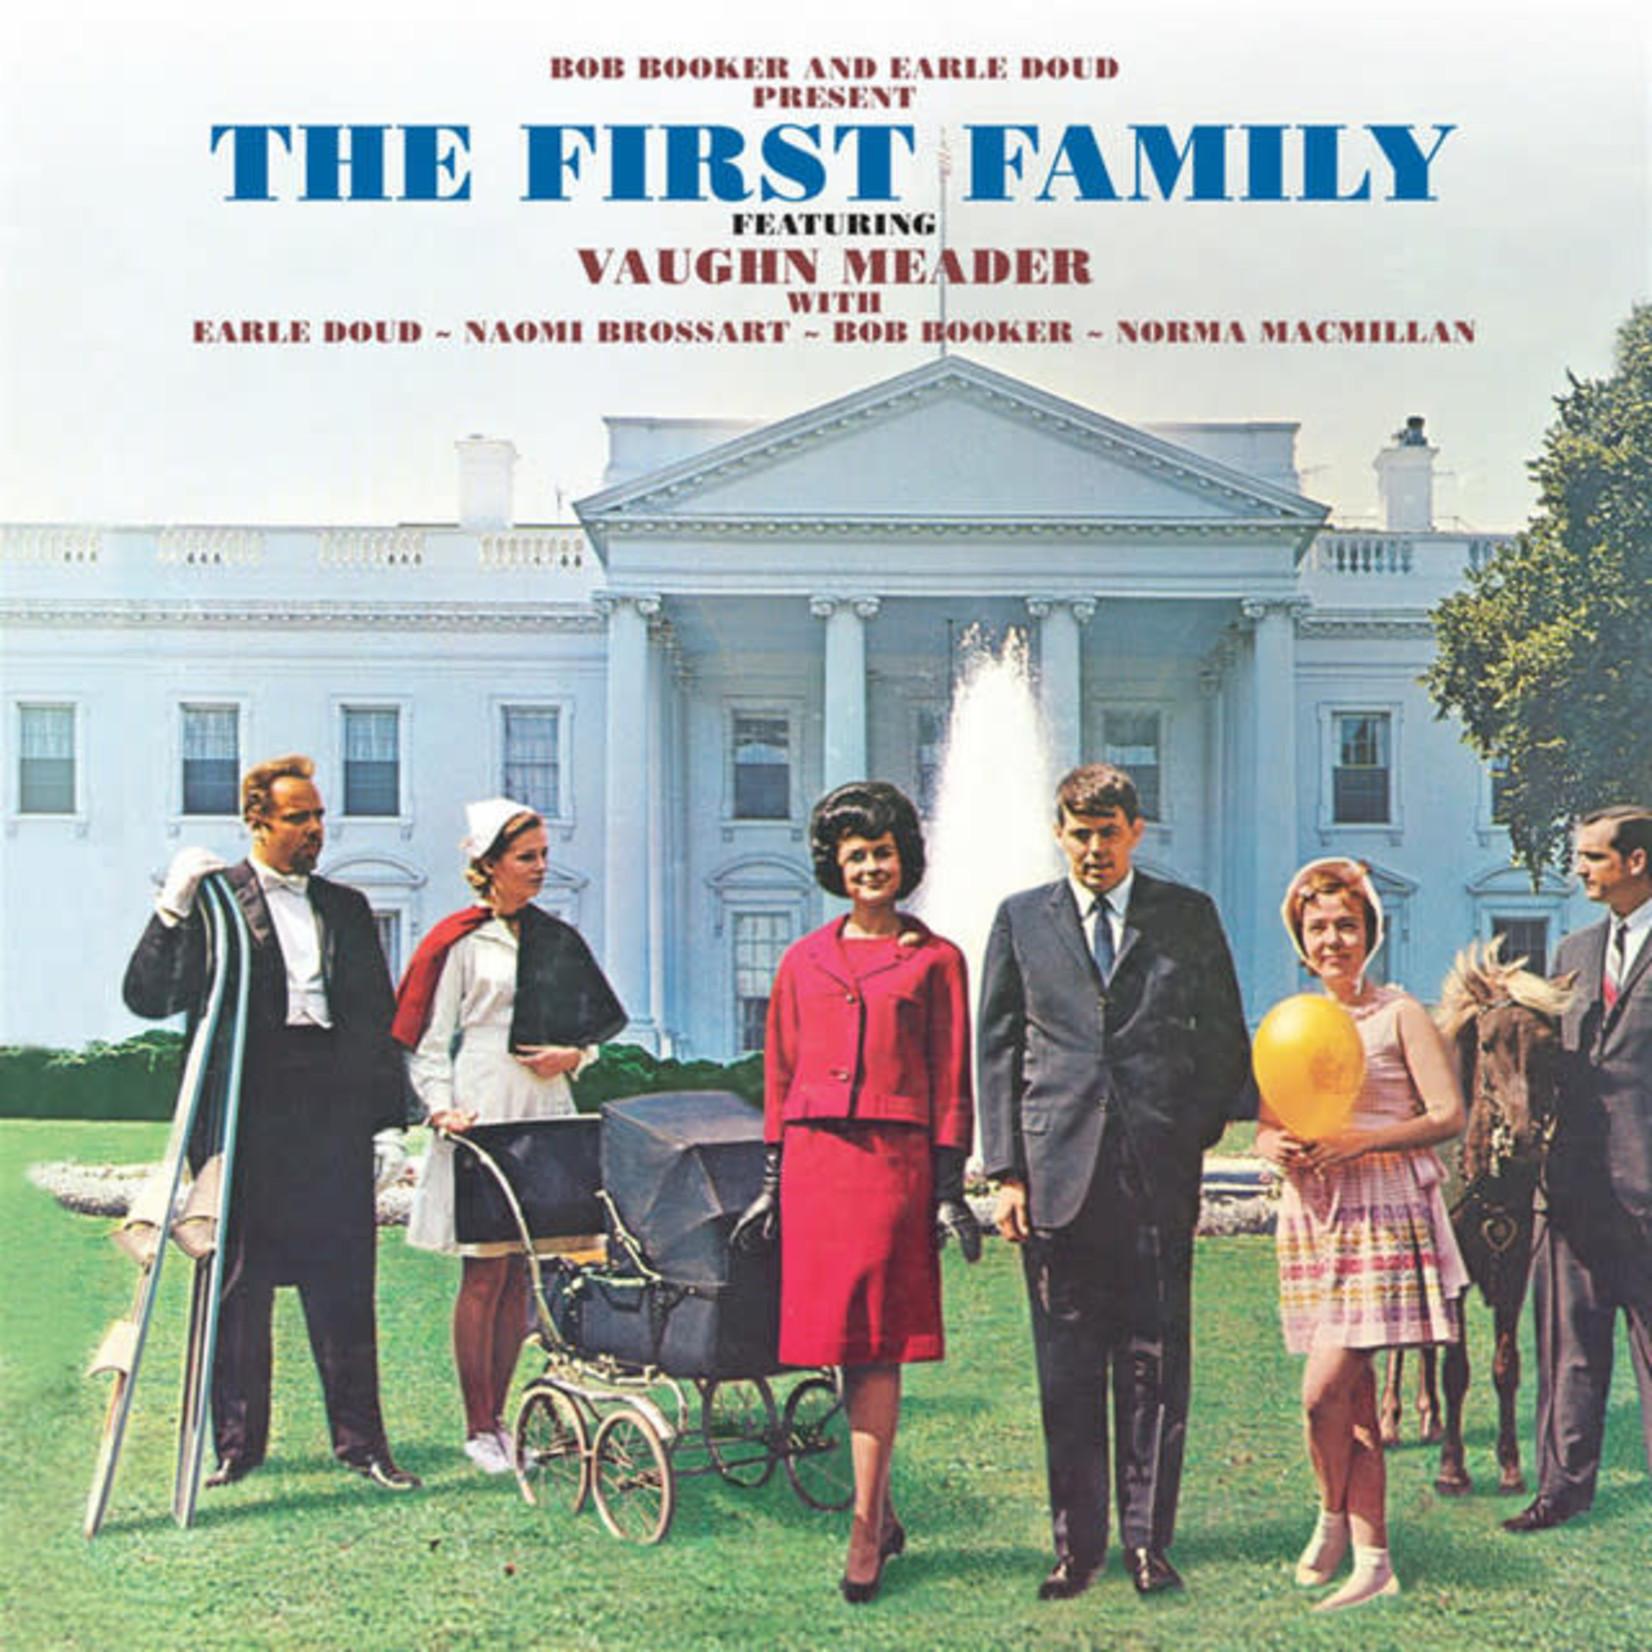 [Vintage] Vaughn Meader - The First Family (comedy)